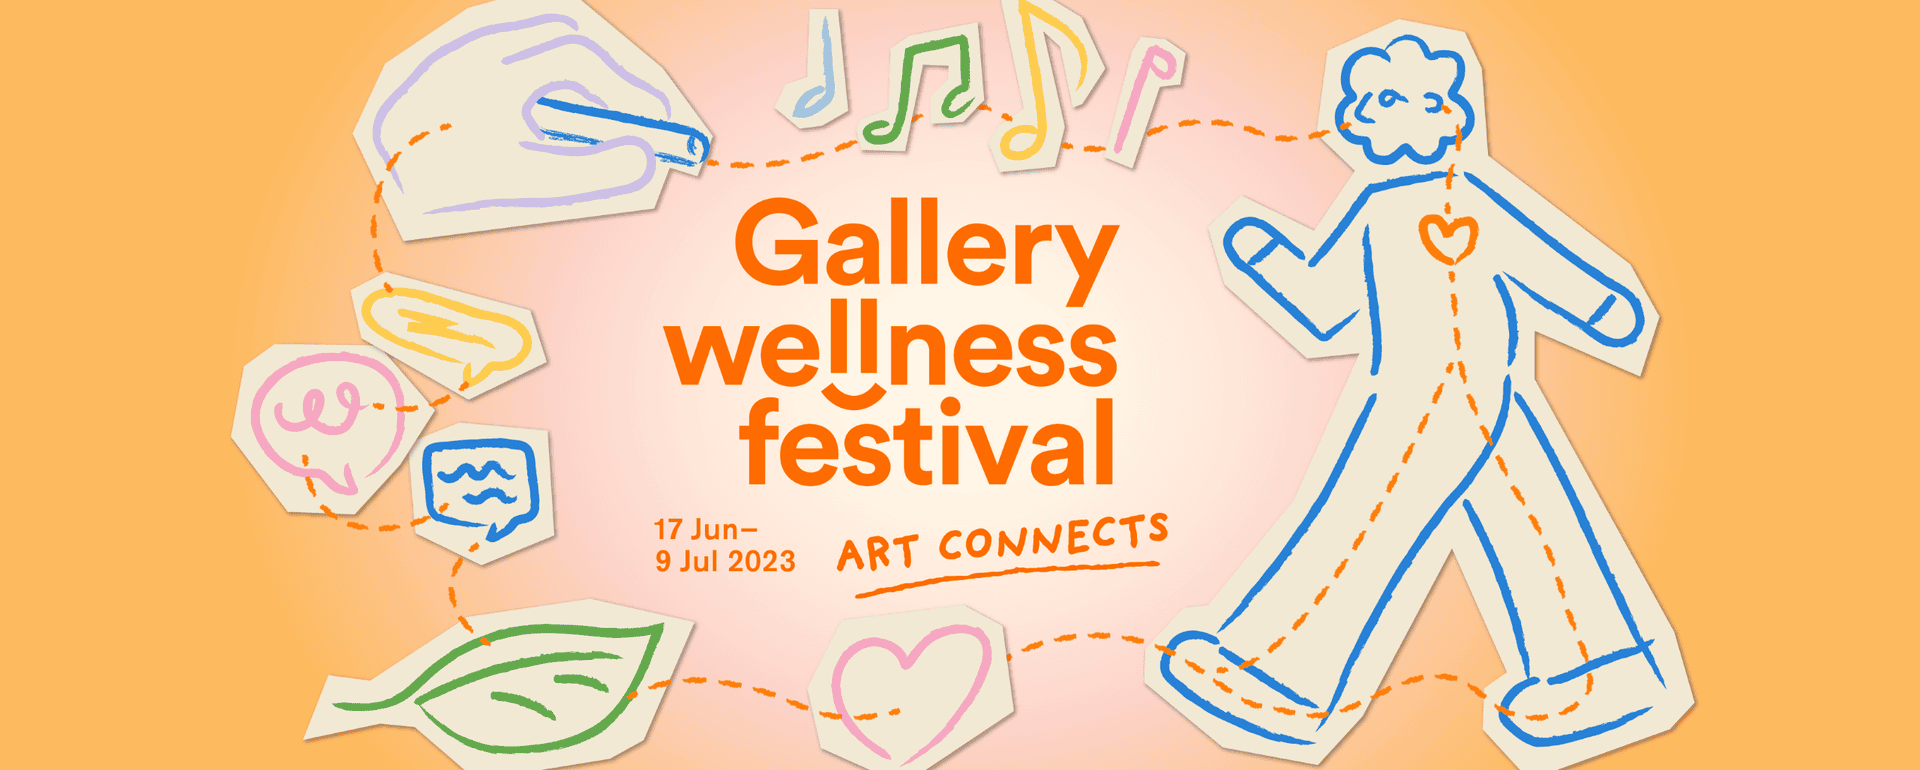 National Gallery Singapore Gallery Wellness Festival 2023 Art Connects